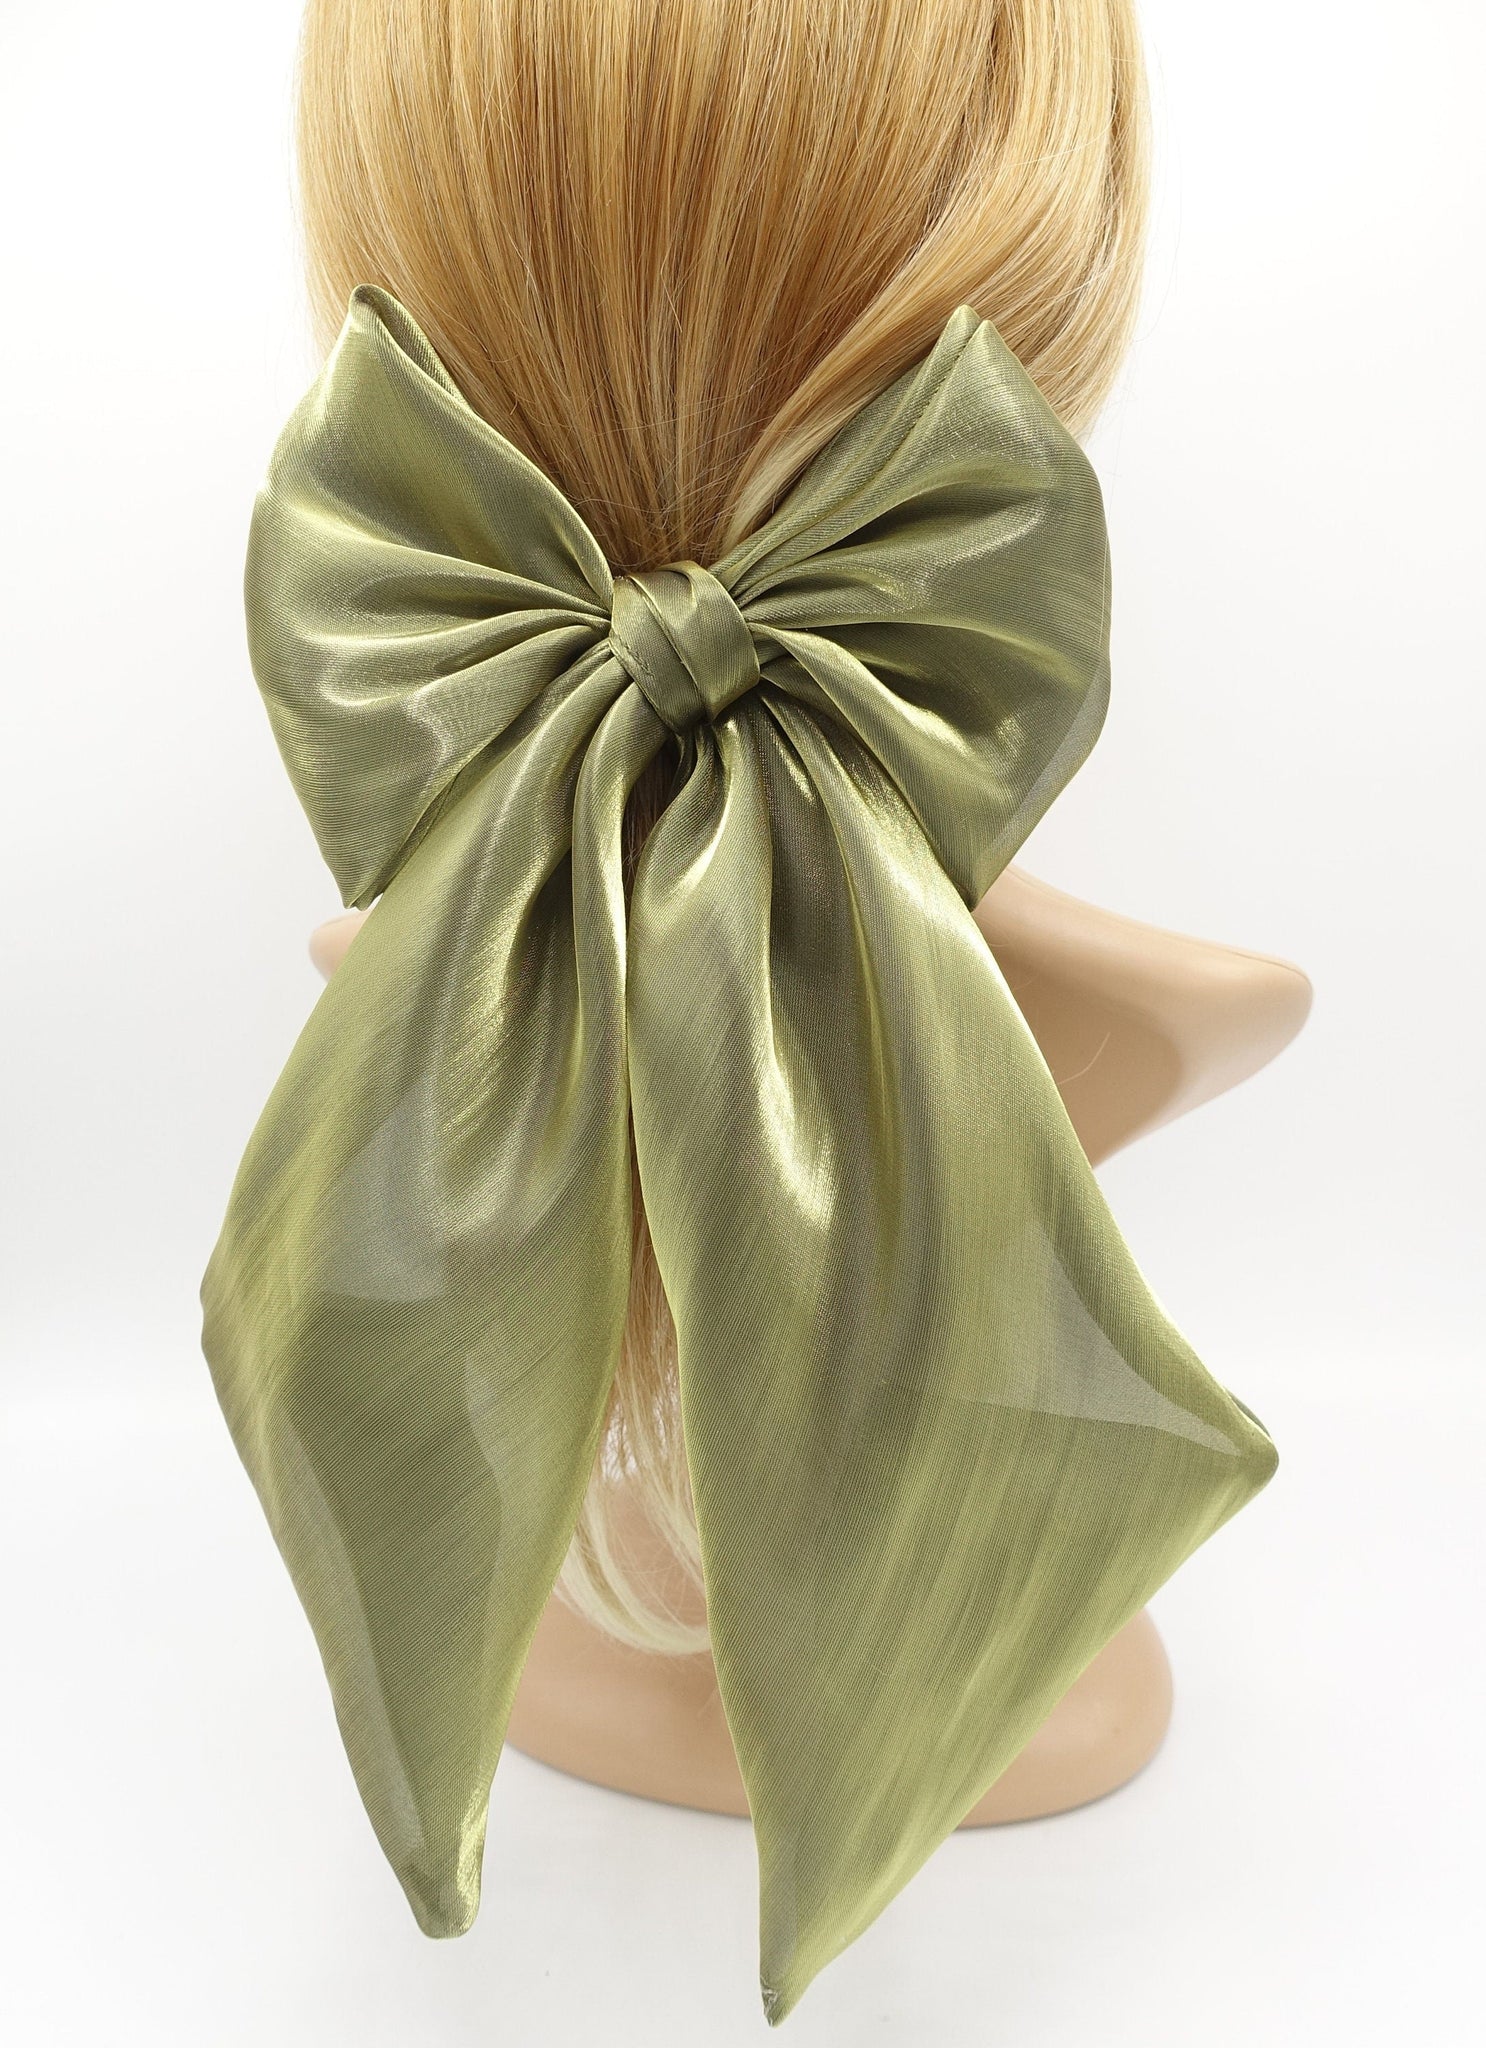 veryshine.com Khaki green organza giant hair bow wide tail oversized hair accessory for women